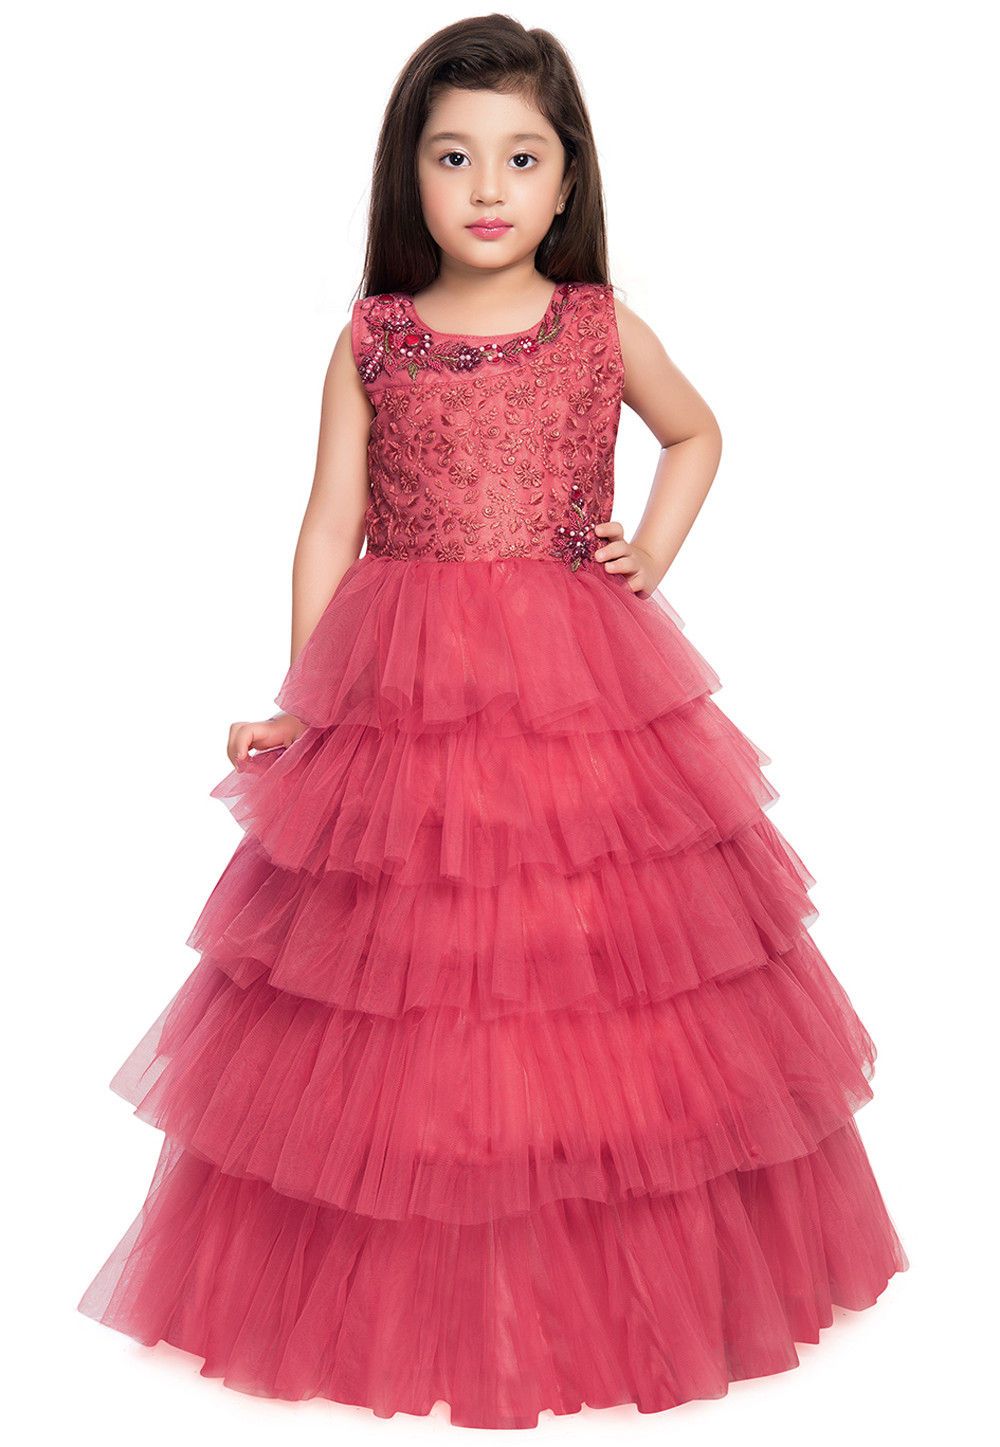 Buy VK Design 2 Layered Plain Heavy Net with Satin patta Border Fancy  Flaired Frock Dress for Kid Girl & Baby_Green-5-6y at Amazon.in